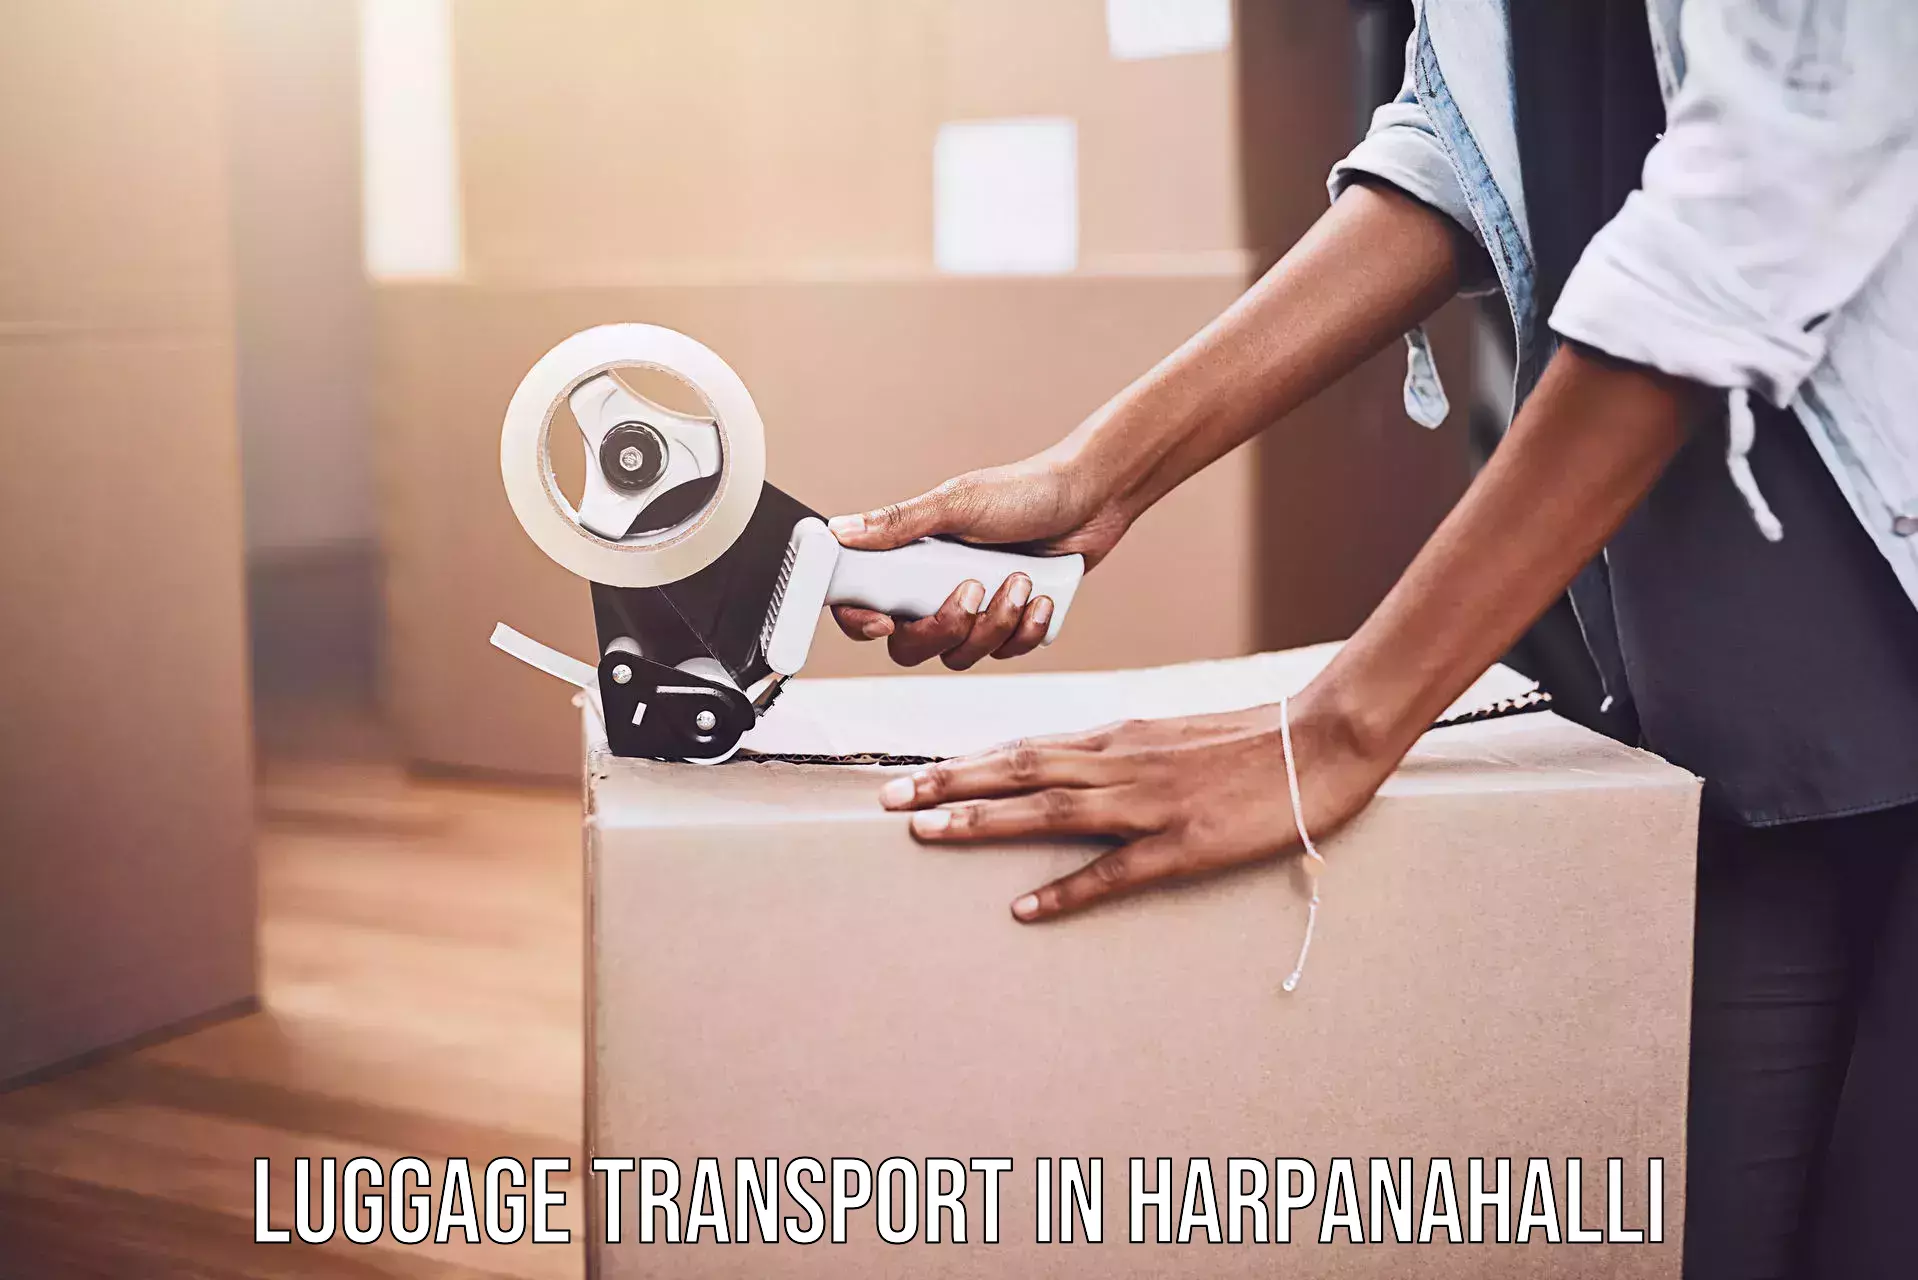 Luggage transport guidelines in Harpanahalli